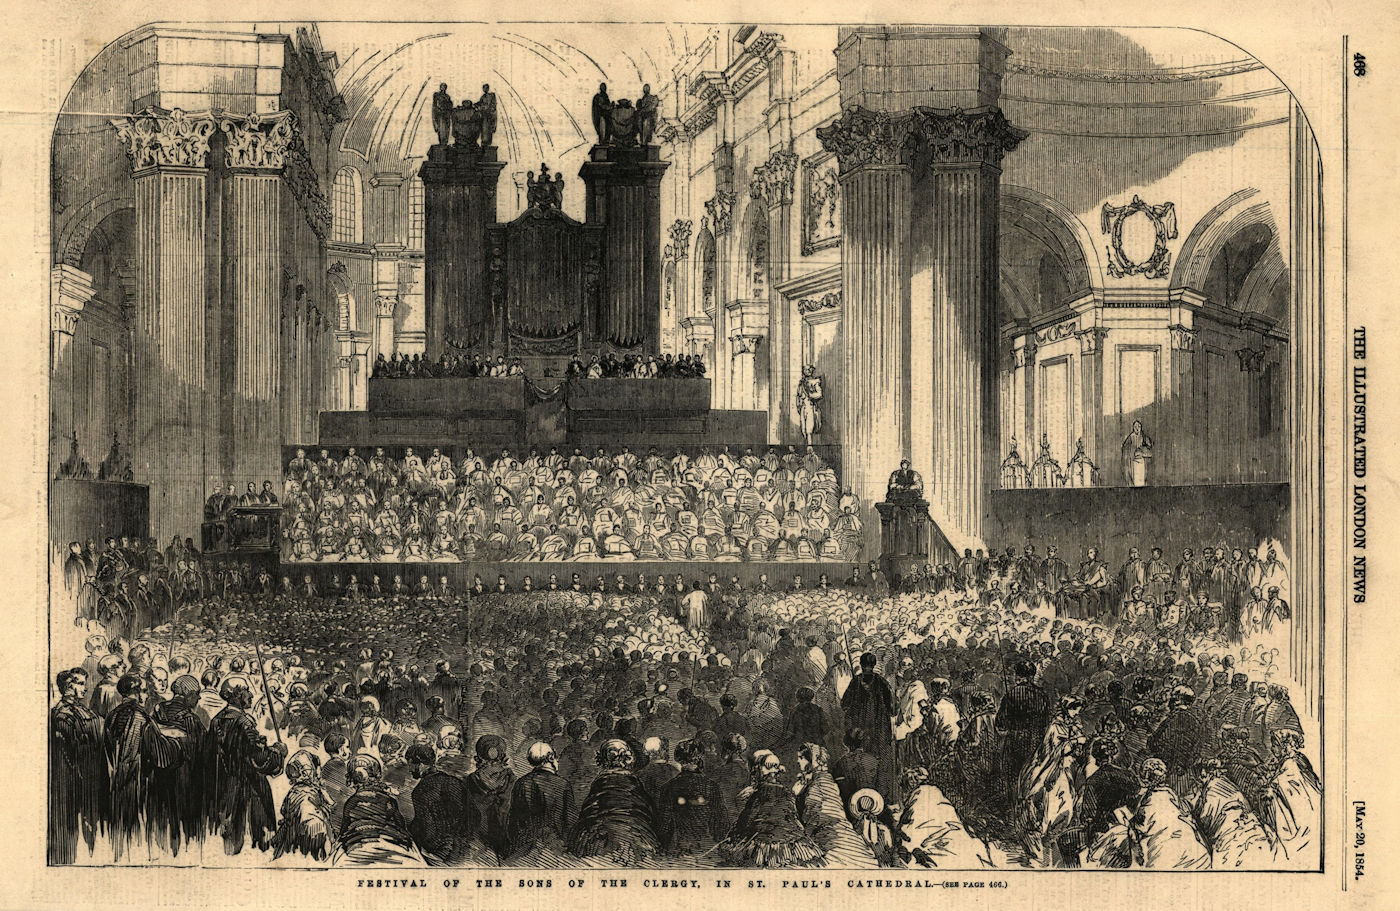 Festival of the sons of the clergy, in St. Paul's Cathedral. London 1854